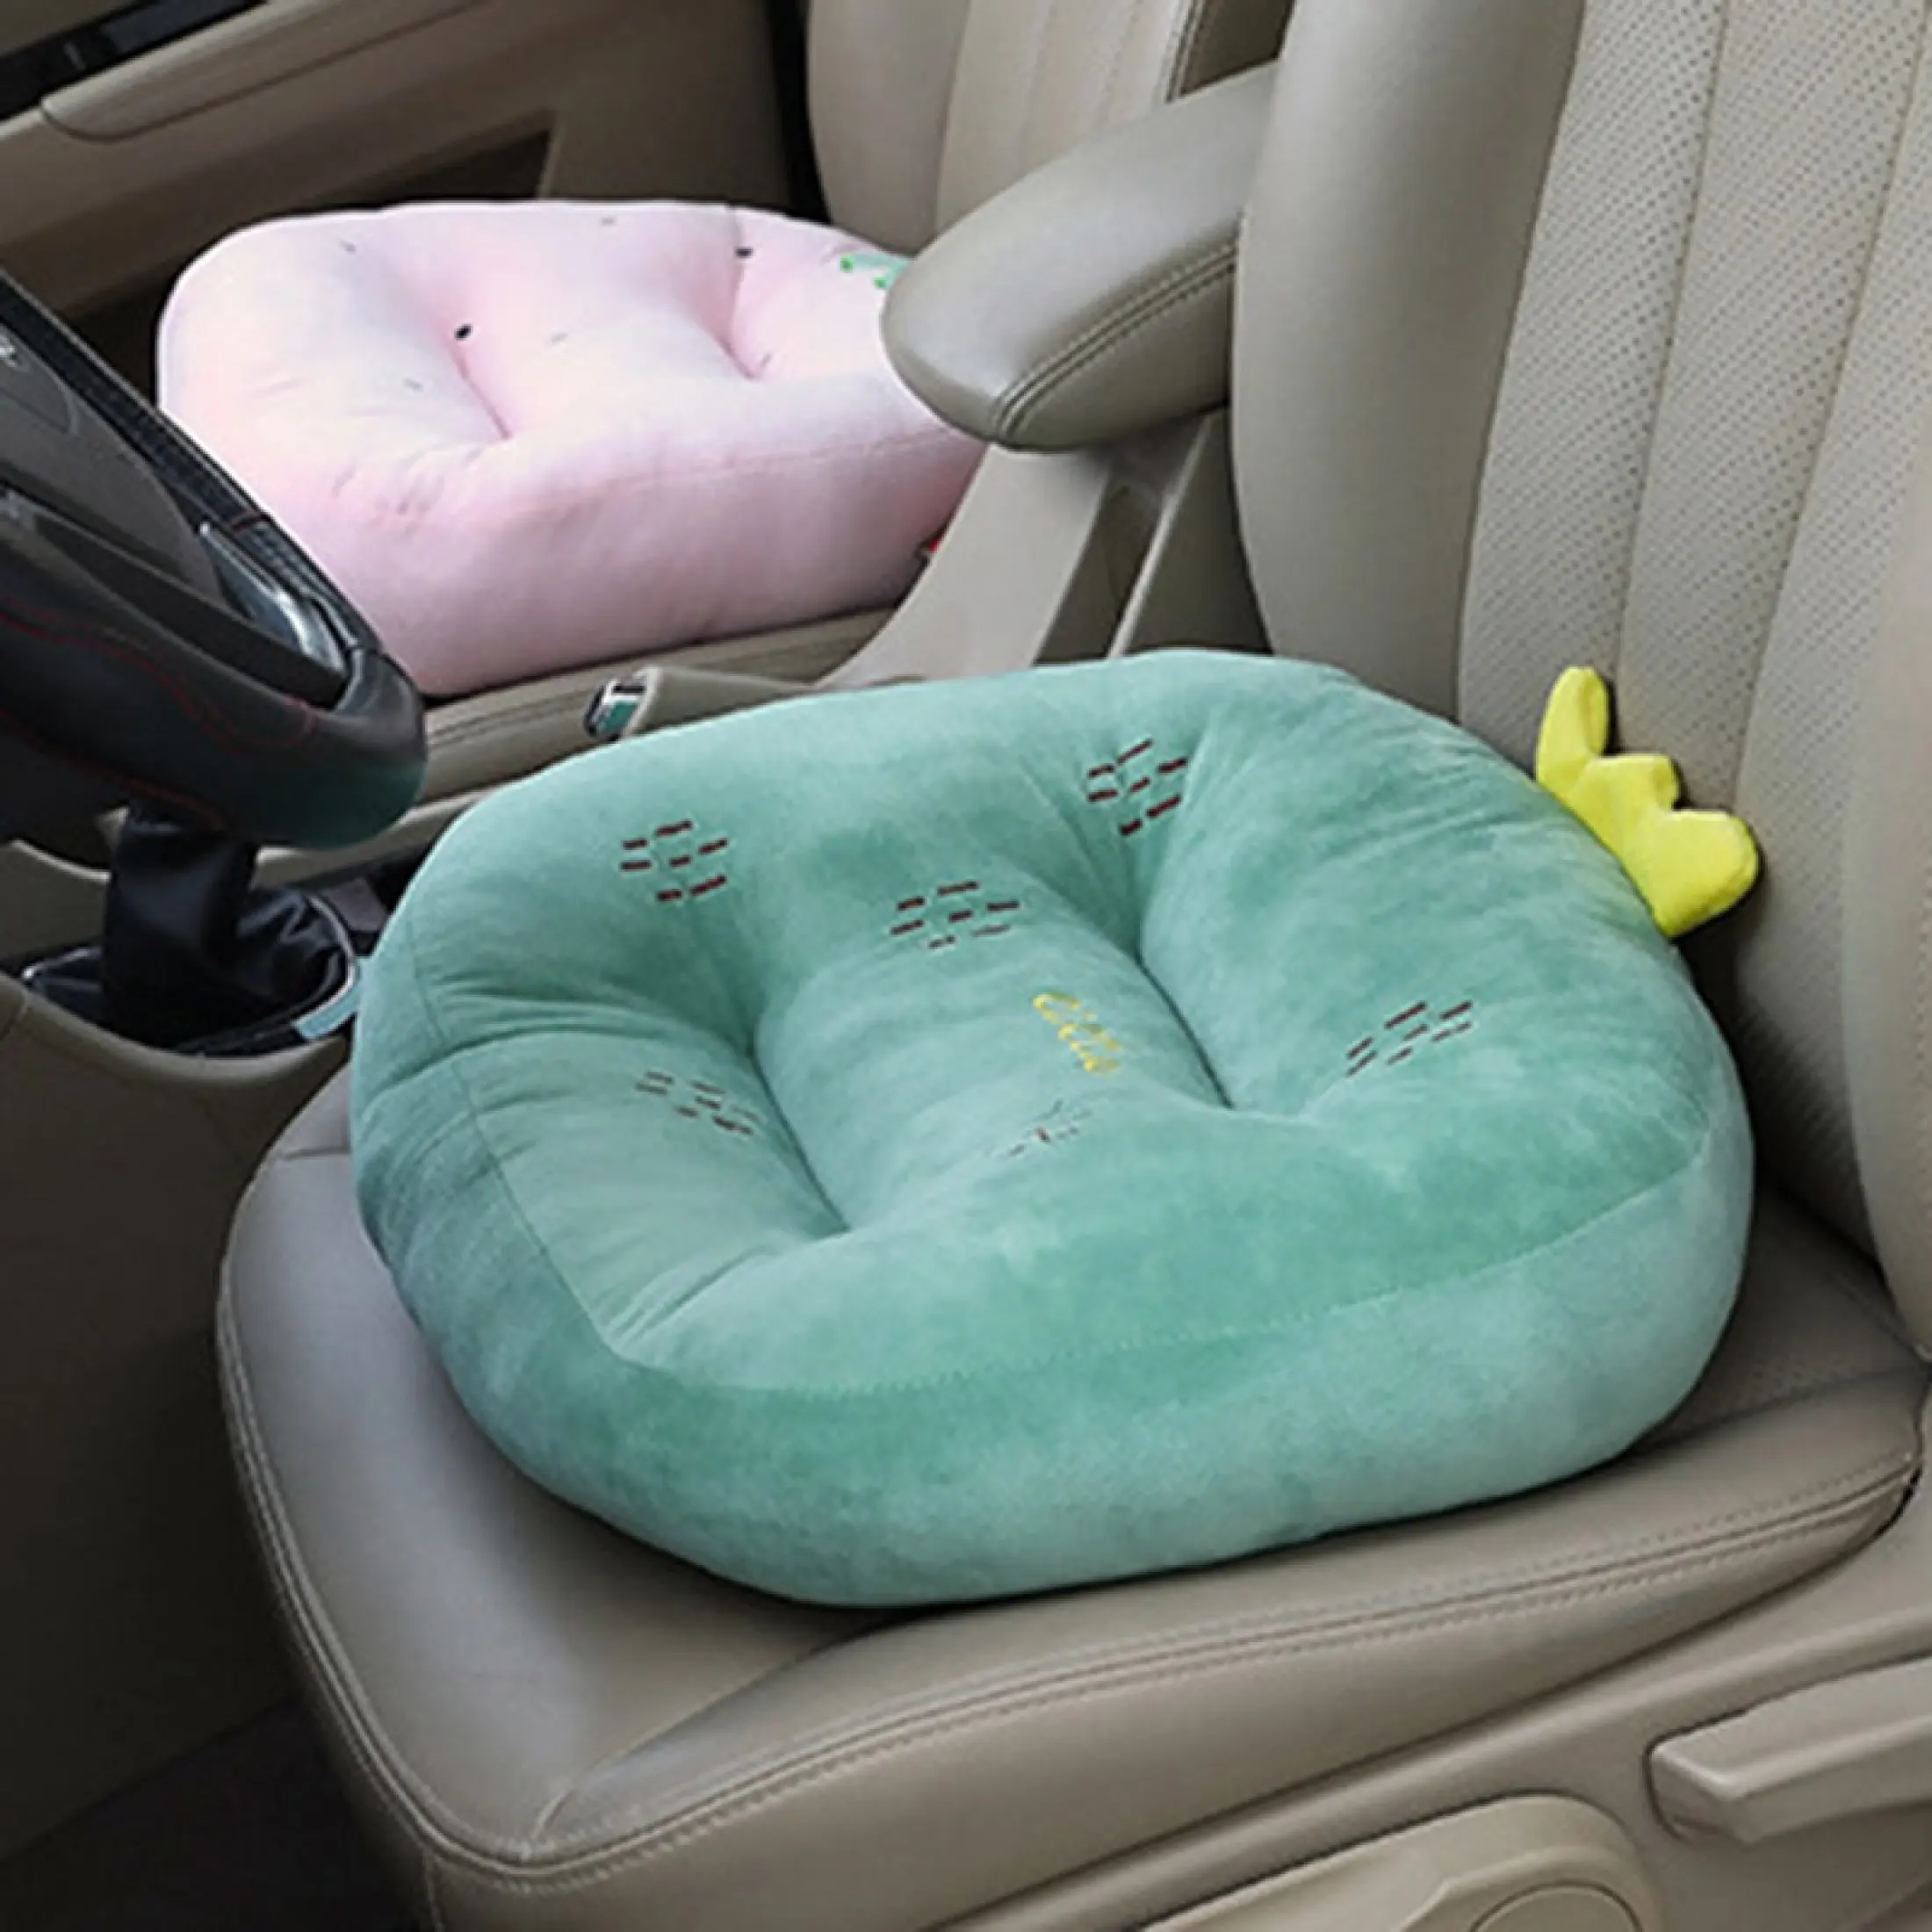 Car Seat Cushion To Raise Height S Deals - How To Raise Height Of Car Seat